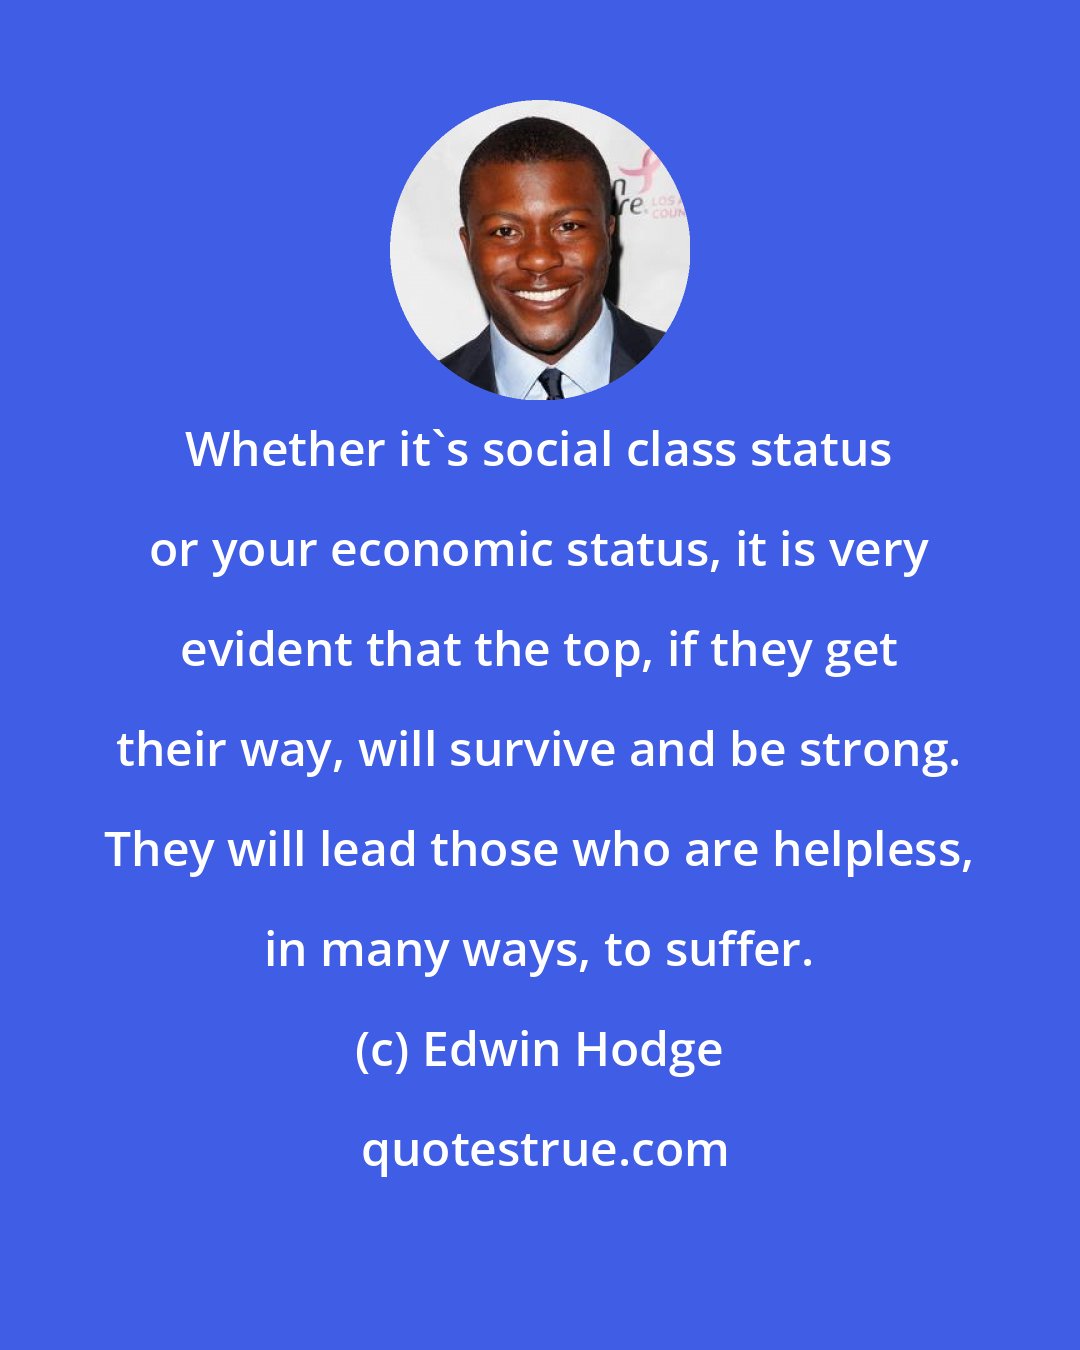 Edwin Hodge: Whether it's social class status or your economic status, it is very evident that the top, if they get their way, will survive and be strong. They will lead those who are helpless, in many ways, to suffer.